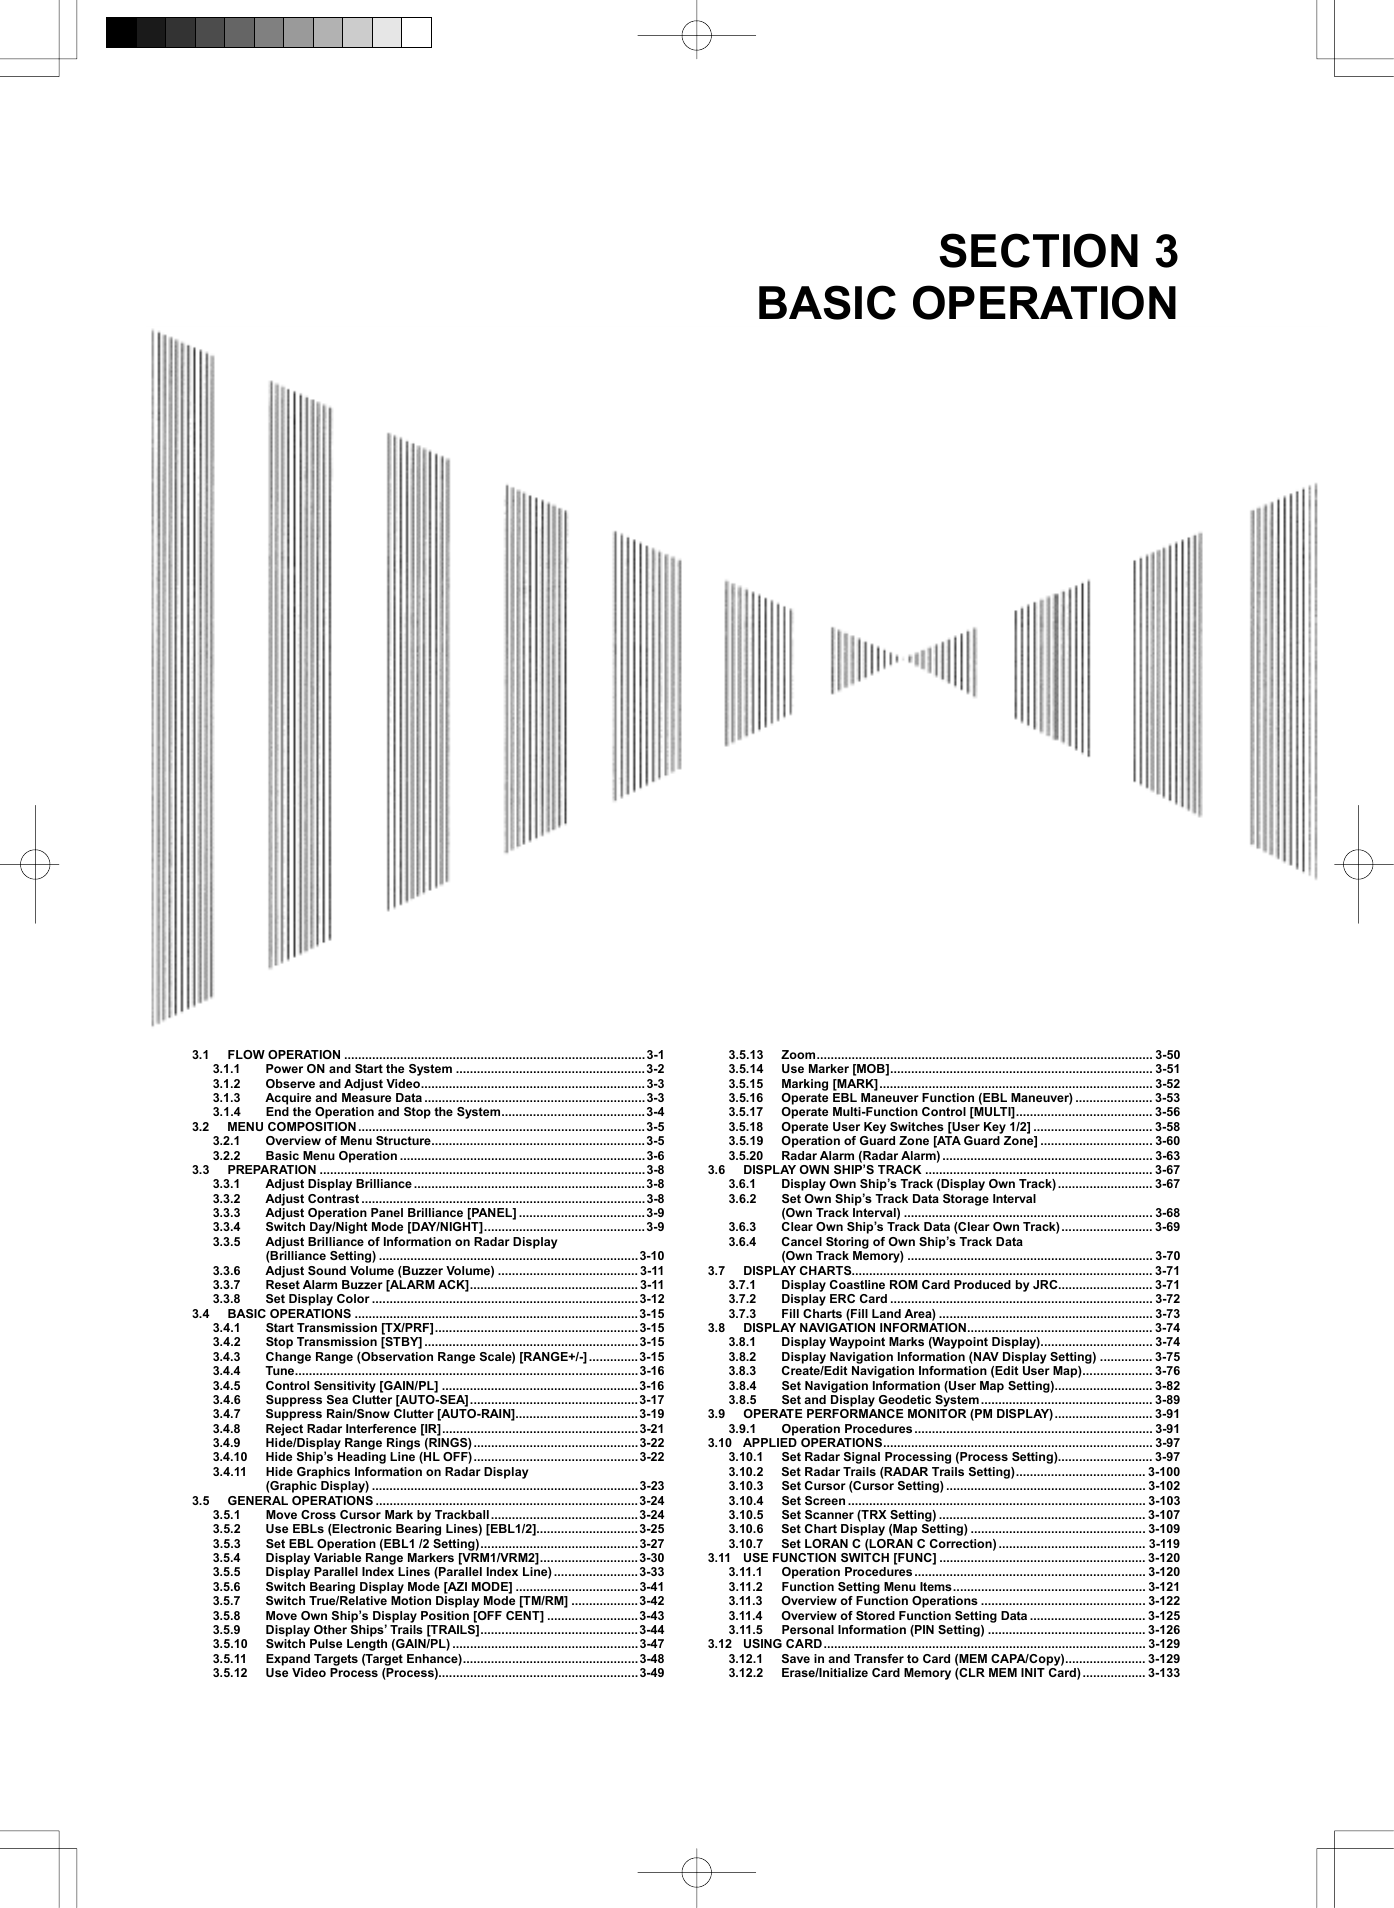   SECTION 3 BASIC OPERATION                               3.1 FLOW OPERATION ......................................................................................3-1 3.1.1  Power ON and Start the System ......................................................3-2 3.1.2  Observe and Adjust Video................................................................ 3-3 3.1.3  Acquire and Measure Data ............................................................... 3-3 3.1.4  End the Operation and Stop the System.........................................3-4 3.2 MENU COMPOSITION..................................................................................3-5 3.2.1  Overview of Menu Structure............................................................. 3-5 3.2.2 Basic Menu Operation ......................................................................3-6 3.3 PREPARATION .............................................................................................3-8 3.3.1  Adjust Display Brilliance .................................................................. 3-8 3.3.2 Adjust Contrast .................................................................................3-8 3.3.3  Adjust Operation Panel Brilliance [PANEL] ....................................3-9 3.3.4  Switch Day/Night Mode [DAY/NIGHT].............................................. 3-9 3.3.5  Adjust Brilliance of Information on Radar Display   (Brilliance Setting) ..........................................................................3-10 3.3.6  Adjust Sound Volume (Buzzer Volume) ........................................ 3-11 3.3.7  Reset Alarm Buzzer [ALARM ACK]................................................ 3-11 3.3.8  Set Display Color ............................................................................3-12 3.4 BASIC OPERATIONS .................................................................................3-15 3.4.1 Start Transmission [TX/PRF].......................................................... 3-15 3.4.2 Stop Transmission [STBY] .............................................................3-15 3.4.3  Change Range (Observation Range Scale) [RANGE+/-]..............3-15 3.4.4 Tune..................................................................................................3-16 3.4.5  Control Sensitivity [GAIN/PL] ........................................................3-16 3.4.6  Suppress Sea Clutter [AUTO-SEA]................................................ 3-17 3.4.7  Suppress Rain/Snow Clutter [AUTO-RAIN]...................................3-19 3.4.8  Reject Radar Interference [IR]........................................................ 3-21 3.4.9  Hide/Display Range Rings (RINGS) ...............................................3-22 3.4.10  Hide Ship’s Heading Line (HL OFF)...............................................3-22 3.4.11  Hide Graphics Information on Radar Display   (Graphic Display) ............................................................................3-23 3.5 GENERAL OPERATIONS ........................................................................... 3-24 3.5.1  Move Cross Cursor Mark by Trackball..........................................3-24 3.5.2  Use EBLs (Electronic Bearing Lines) [EBL1/2].............................3-25 3.5.3  Set EBL Operation (EBL1 /2 Setting)............................................. 3-27 3.5.4  Display Variable Range Markers [VRM1/VRM2]............................3-30 3.5.5  Display Parallel Index Lines (Parallel Index Line) ........................ 3-33 3.5.6  Switch Bearing Display Mode [AZI MODE] ...................................3-41 3.5.7  Switch True/Relative Motion Display Mode [TM/RM] ...................3-42 3.5.8  Move Own Ship’s Display Position [OFF CENT] ..........................3-43 3.5.9  Display Other Ships’ Trails [TRAILS].............................................3-44 3.5.10  Switch Pulse Length (GAIN/PL) .....................................................3-47 3.5.11 Expand Targets (Target Enhance)..................................................3-48 3.5.12  Use Video Process (Process).........................................................3-49 3.5.13 Zoom................................................................................................ 3-50 3.5.14 Use Marker [MOB]........................................................................... 3-51 3.5.15 Marking [MARK].............................................................................. 3-52 3.5.16  Operate EBL Maneuver Function (EBL Maneuver) ...................... 3-53 3.5.17  Operate Multi-Function Control [MULTI]....................................... 3-56 3.5.18  Operate User Key Switches [User Key 1/2] .................................. 3-58 3.5.19  Operation of Guard Zone [ATA Guard Zone] ................................ 3-60 3.5.20 Radar Alarm (Radar Alarm) ............................................................ 3-63 3.6 DISPLAY OWN SHIP’S TRACK ................................................................. 3-67 3.6.1  Display Own Ship’s Track (Display Own Track)........................... 3-67 3.6.2  Set Own Ship’s Track Data Storage Interval   (Own Track Interval) ....................................................................... 3-68 3.6.3  Clear Own Ship’s Track Data (Clear Own Track).......................... 3-69 3.6.4  Cancel Storing of Own Ship’s Track Data   (Own Track Memory) ...................................................................... 3-70 3.7 DISPLAY CHARTS...................................................................................... 3-71 3.7.1  Display Coastline ROM Card Produced by JRC........................... 3-71 3.7.2  Display ERC Card ........................................................................... 3-72 3.7.3  Fill Charts (Fill Land Area) ............................................................. 3-73 3.8 DISPLAY NAVIGATION INFORMATION..................................................... 3-74 3.8.1  Display Waypoint Marks (Waypoint Display)................................ 3-74 3.8.2  Display Navigation Information (NAV Display Setting) ............... 3-75 3.8.3  Create/Edit Navigation Information (Edit User Map).................... 3-76 3.8.4  Set Navigation Information (User Map Setting)............................ 3-82 3.8.5  Set and Display Geodetic System................................................. 3-89 3.9 OPERATE PERFORMANCE MONITOR (PM DISPLAY) ............................ 3-91 3.9.1 Operation Procedures .................................................................... 3-91 3.10 APPLIED OPERATIONS............................................................................. 3-97 3.10.1  Set Radar Signal Processing (Process Setting)........................... 3-97 3.10.2  Set Radar Trails (RADAR Trails Setting)..................................... 3-100 3.10.3  Set Cursor (Cursor Setting) ......................................................... 3-102 3.10.4 Set Screen ..................................................................................... 3-103 3.10.5  Set Scanner (TRX Setting) ........................................................... 3-107 3.10.6  Set Chart Display (Map Setting) .................................................. 3-109 3.10.7  Set LORAN C (LORAN C Correction) .......................................... 3-119 3.11 USE FUNCTION SWITCH [FUNC] ........................................................... 3-120 3.11.1 Operation Procedures .................................................................. 3-120 3.11.2 Function Setting Menu Items....................................................... 3-121 3.11.3  Overview of Function Operations ............................................... 3-122 3.11.4  Overview of Stored Function Setting Data ................................. 3-125 3.11.5 Personal Information (PIN Setting) ............................................. 3-126 3.12 USING CARD............................................................................................ 3-129 3.12.1  Save in and Transfer to Card (MEM CAPA/Copy)....................... 3-129 3.12.2  Erase/Initialize Card Memory (CLR MEM INIT Card).................. 3-133 